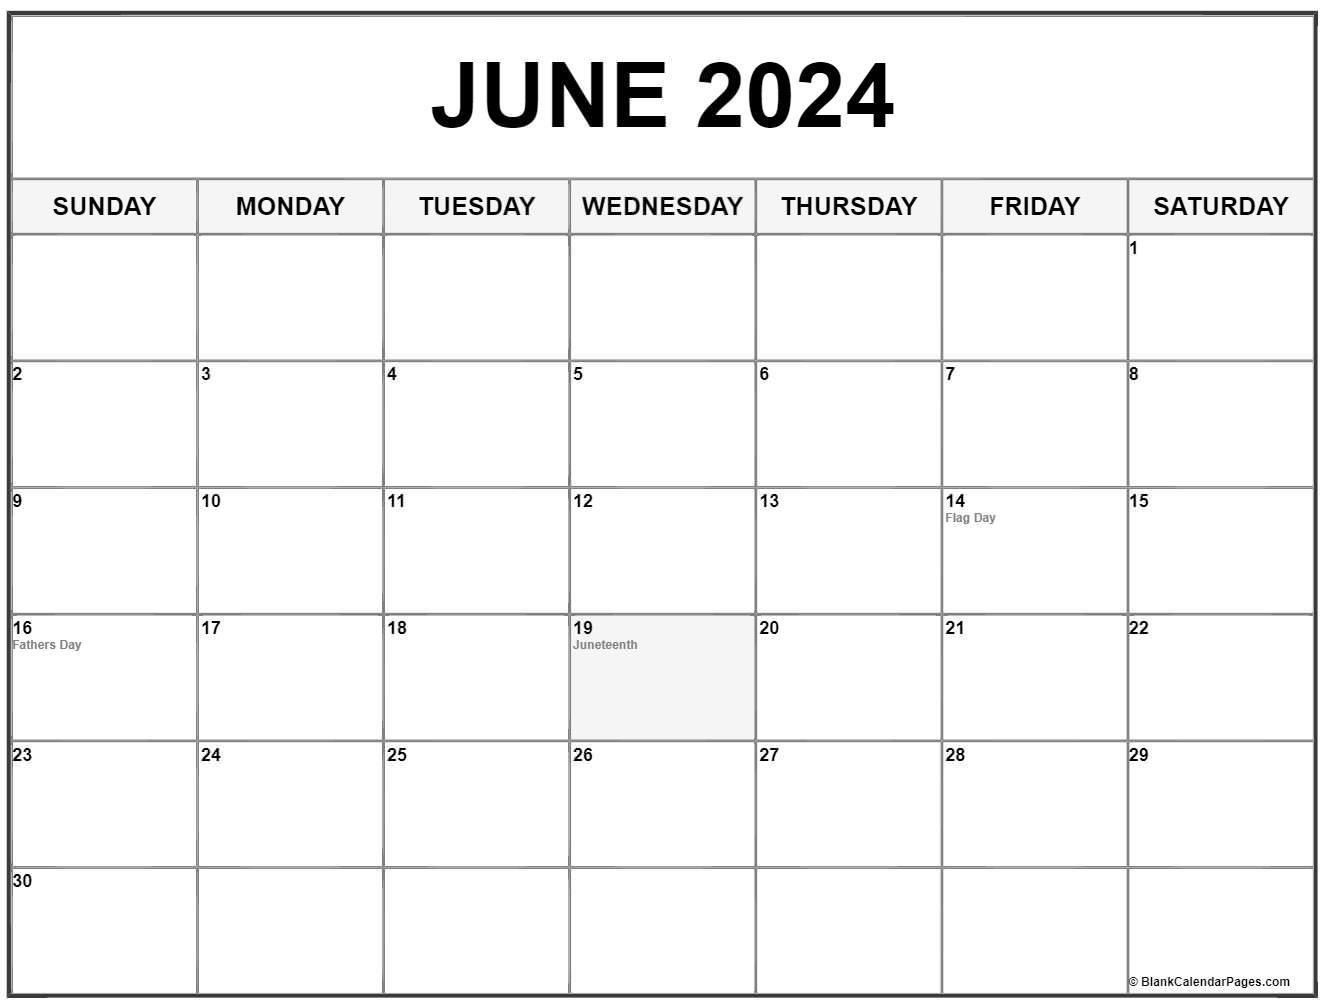 collection-of-june-2019-calendars-with-holidays